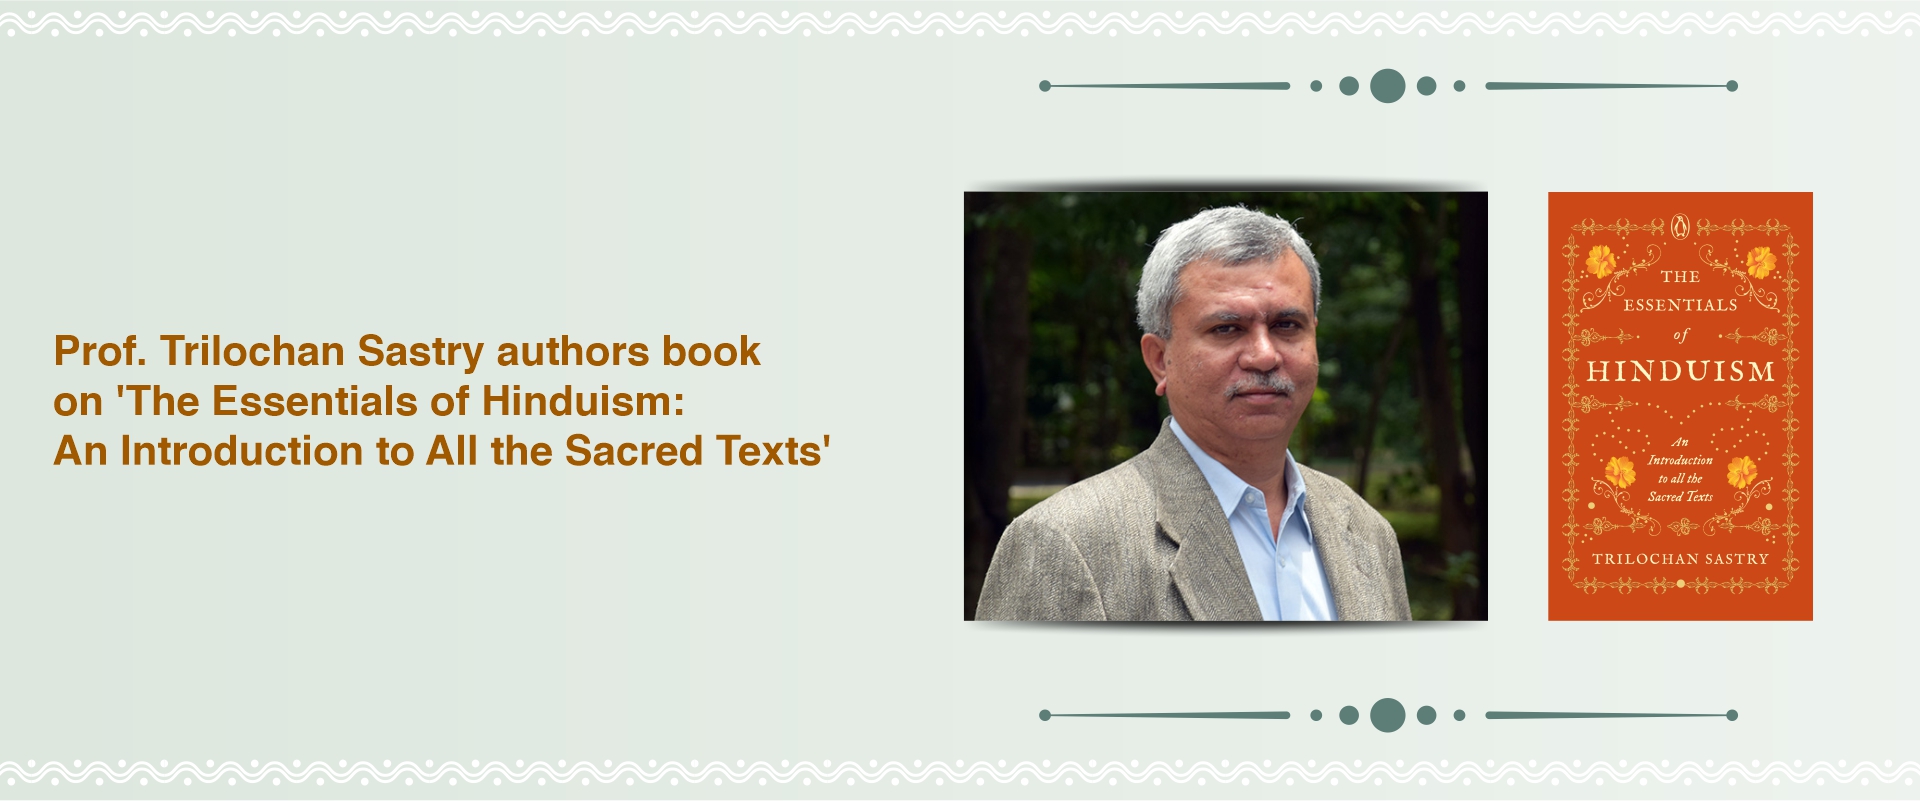 Prof. Trilochan Sastry authors book on ‘The Essentials of Hinduism